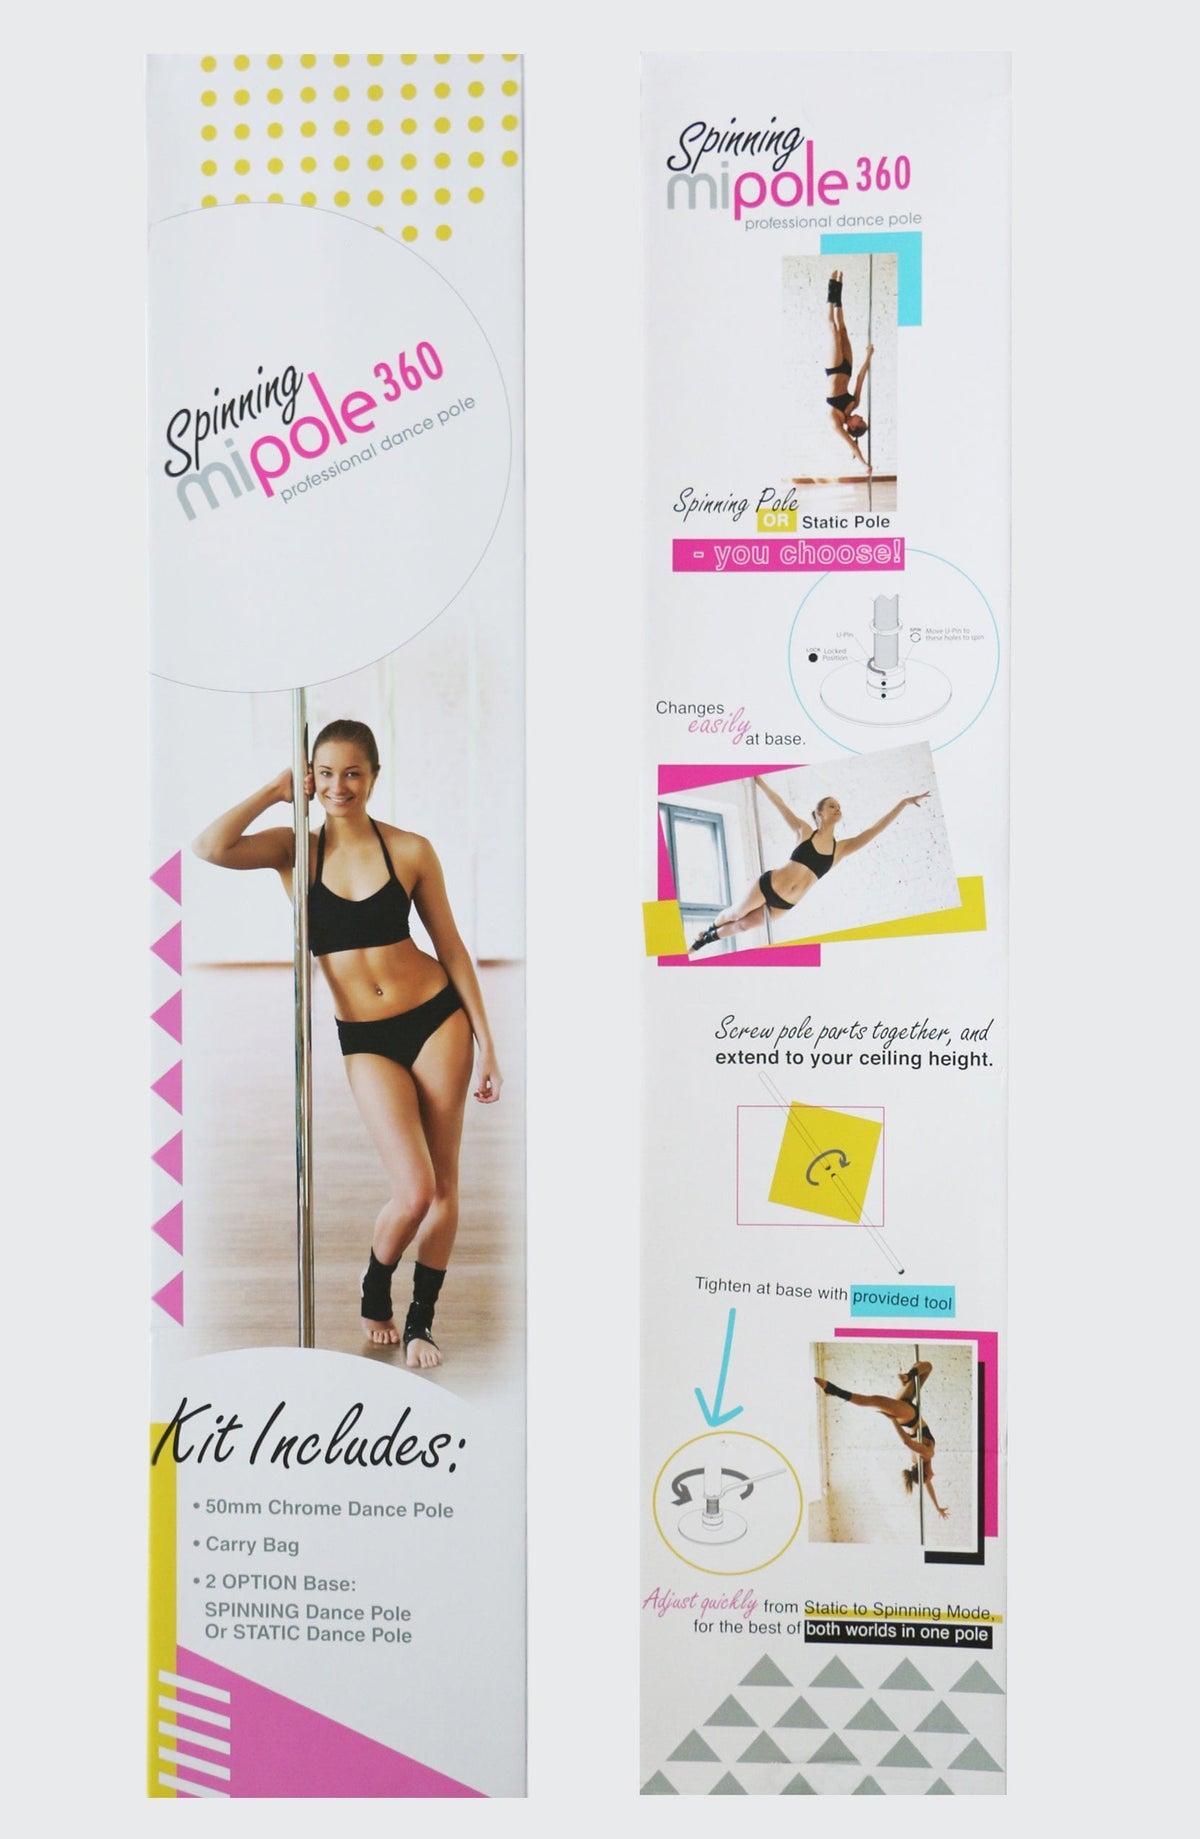 SPINNING PROFESSIONAL DANCE POLE